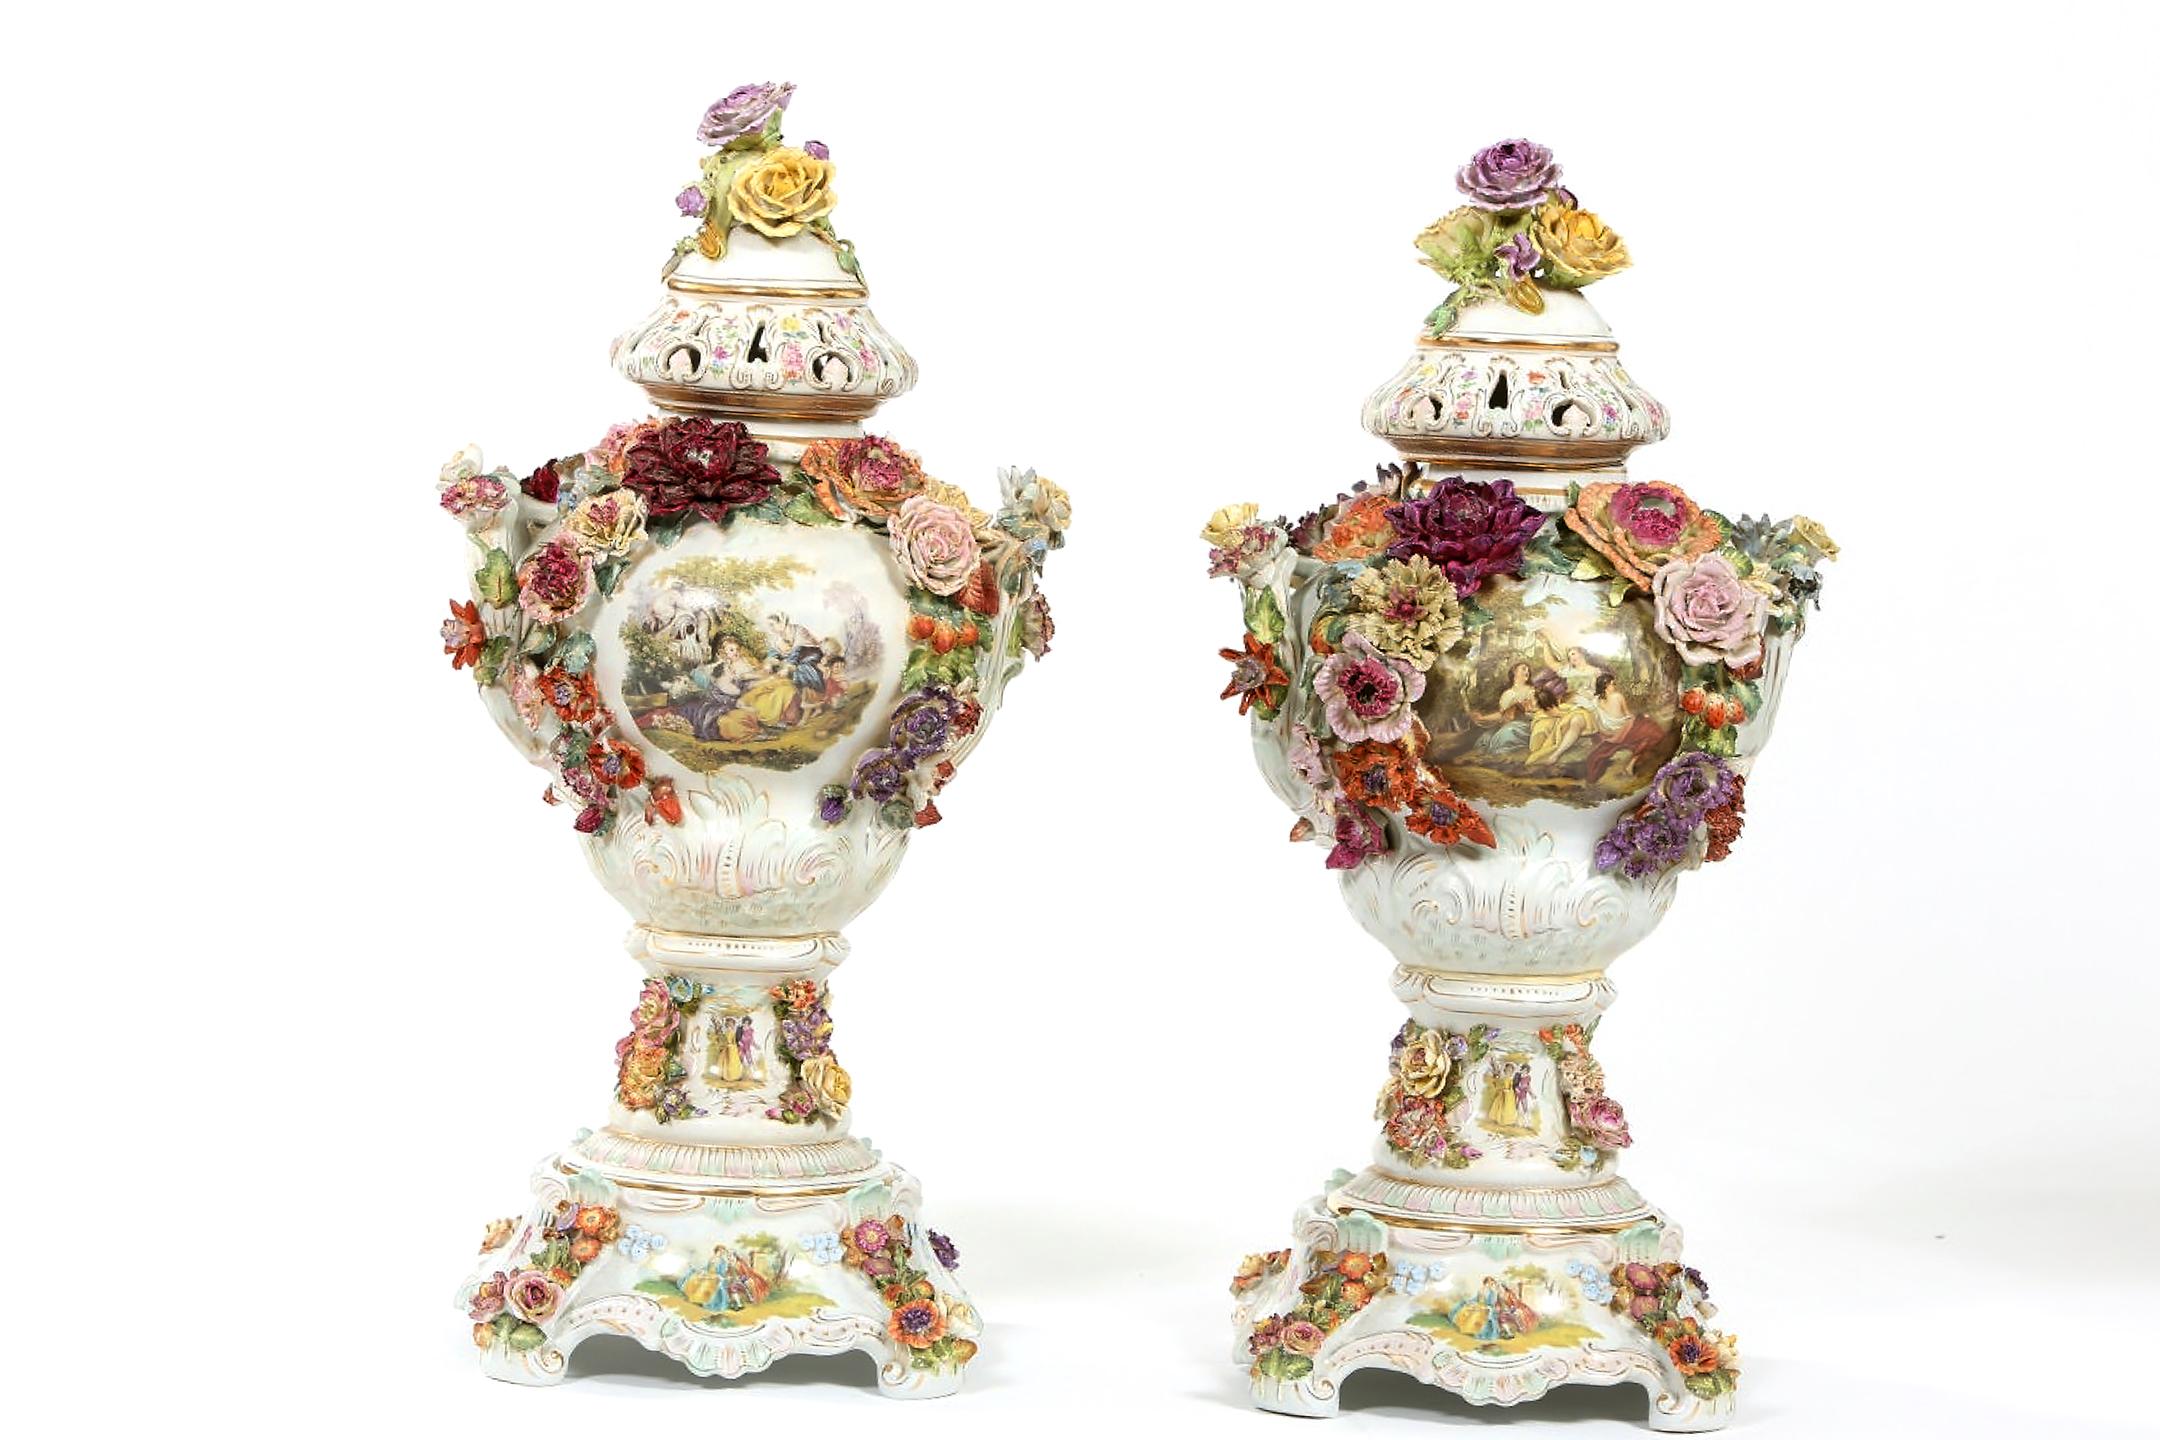 Impressive pair of German Dresden porcelain decorative covered urn, delicately painted overall with flowers and enhanced by clusters of porcelain flowers. Each piece is in great condition with wear consistent with age / use. Maker's mark